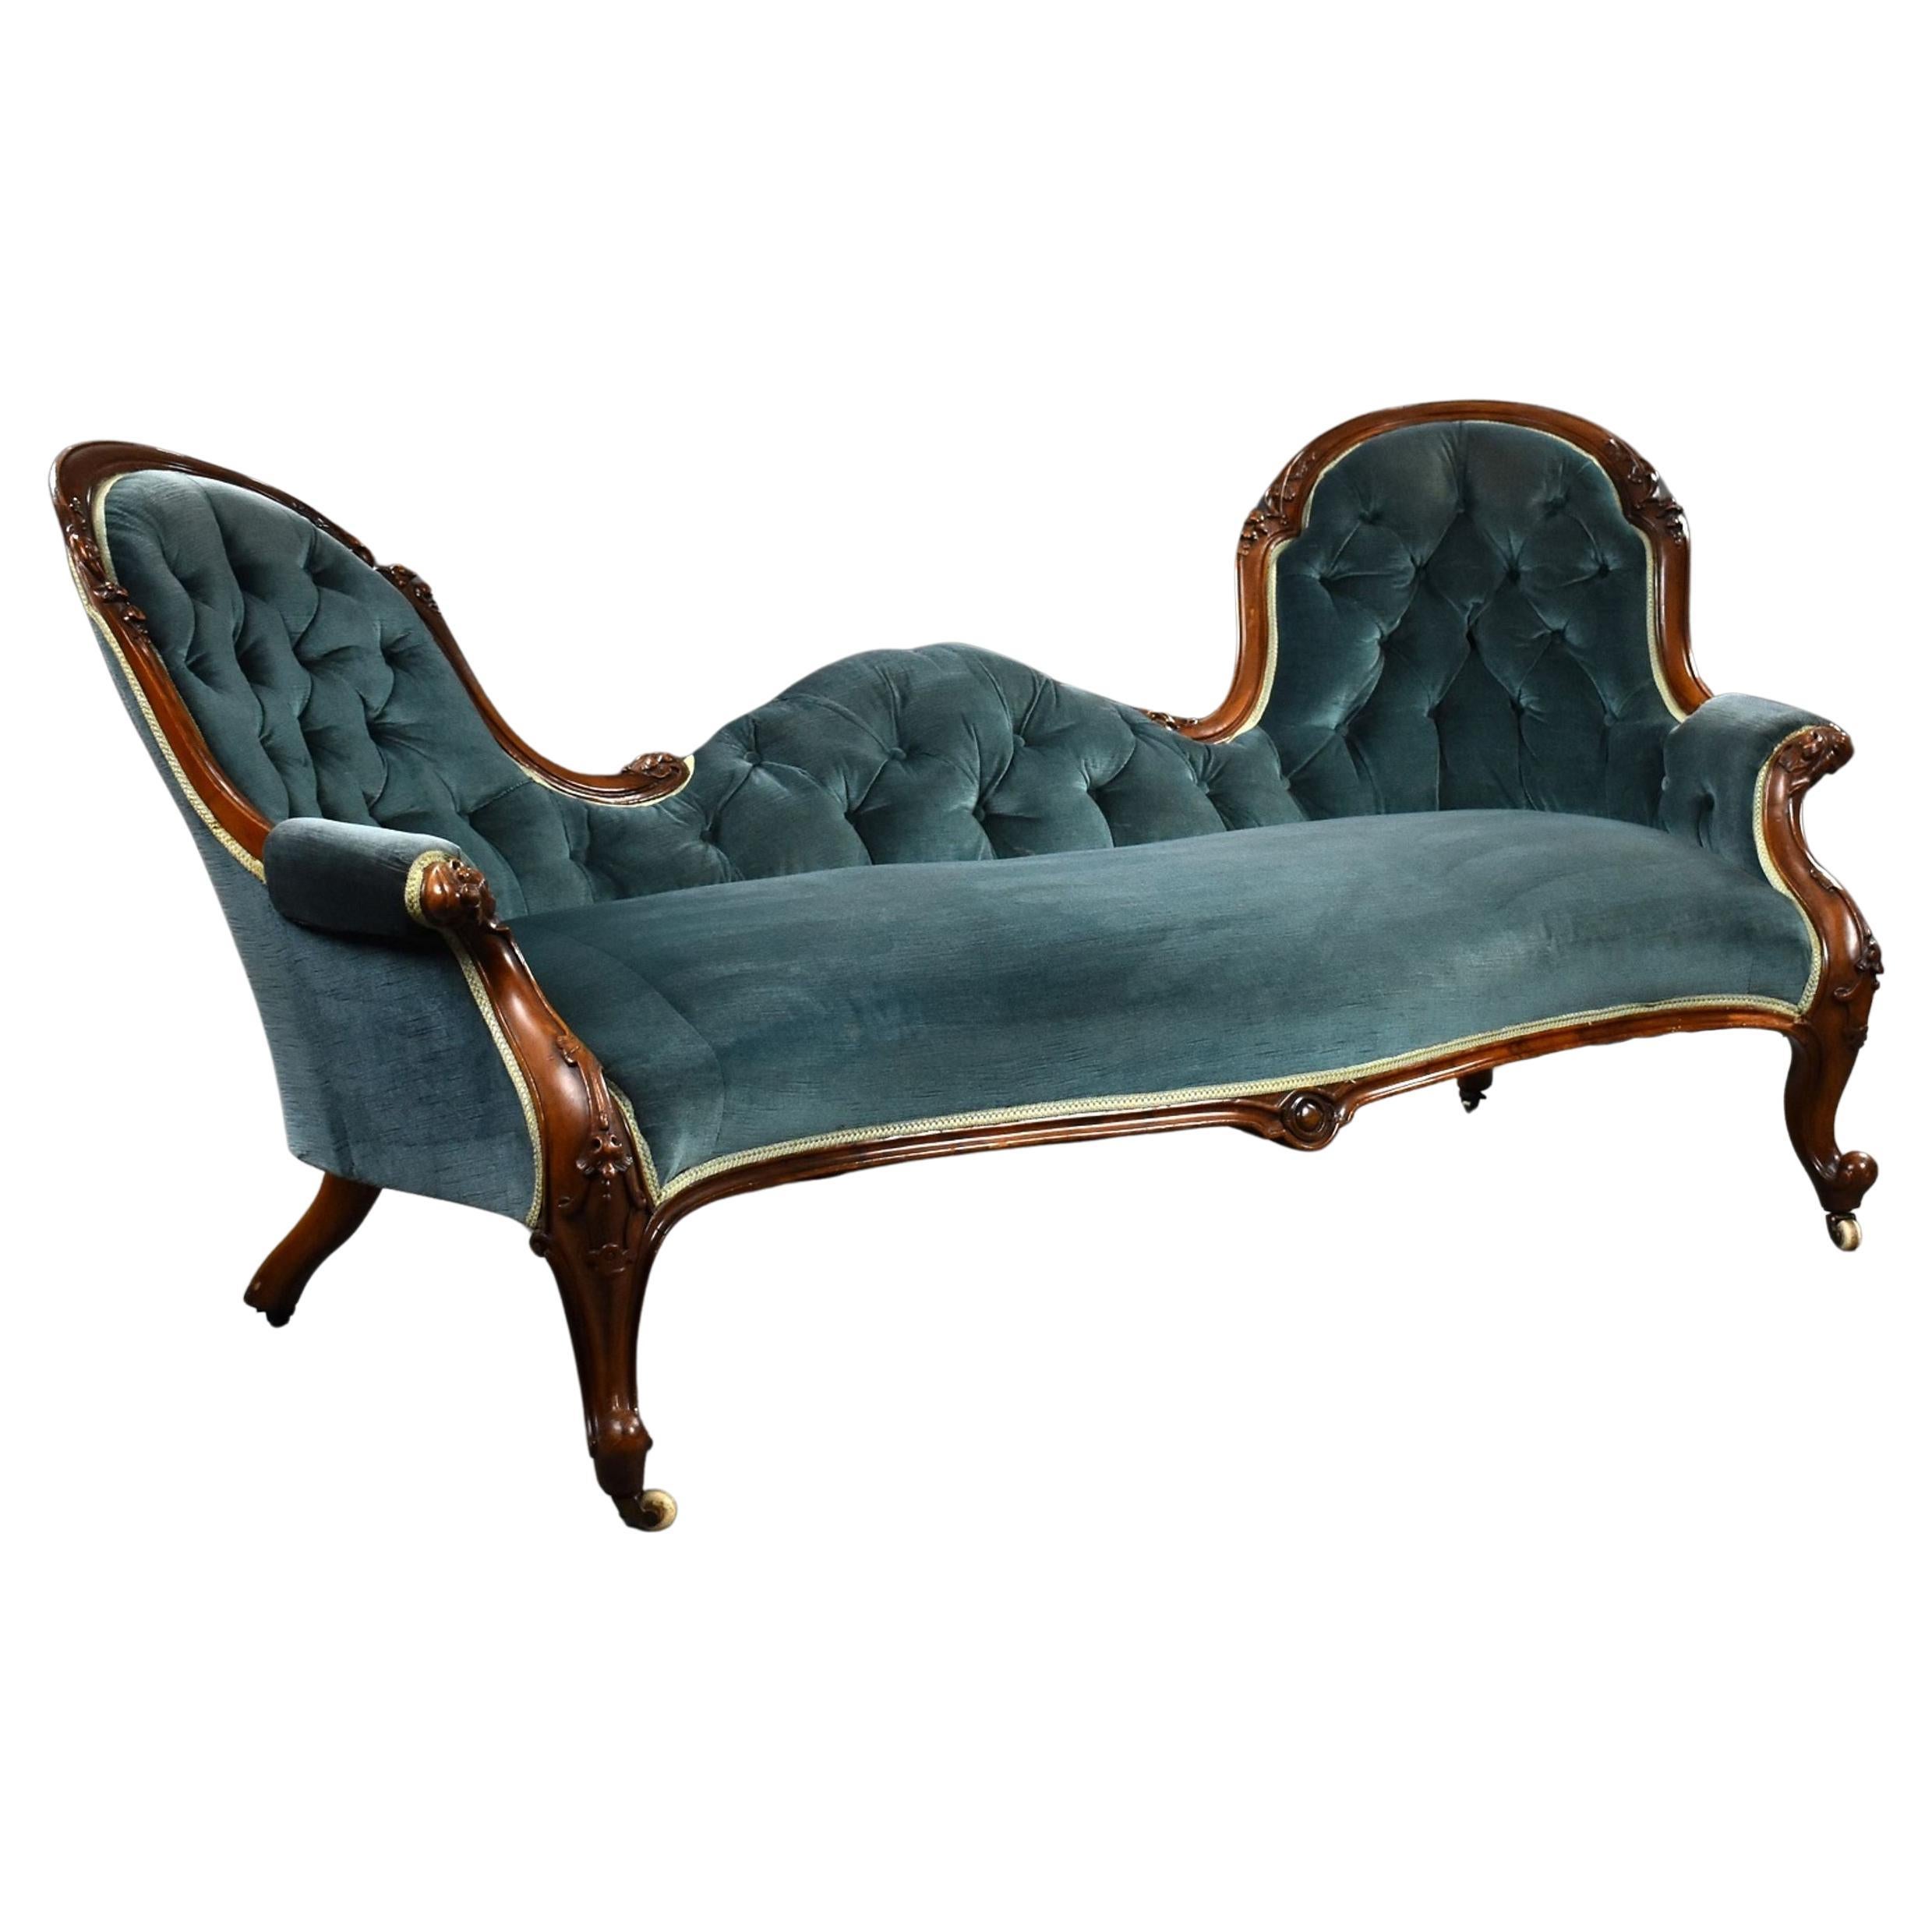 Victorian Mahogany Double Ended Chaise Lounge For Sale